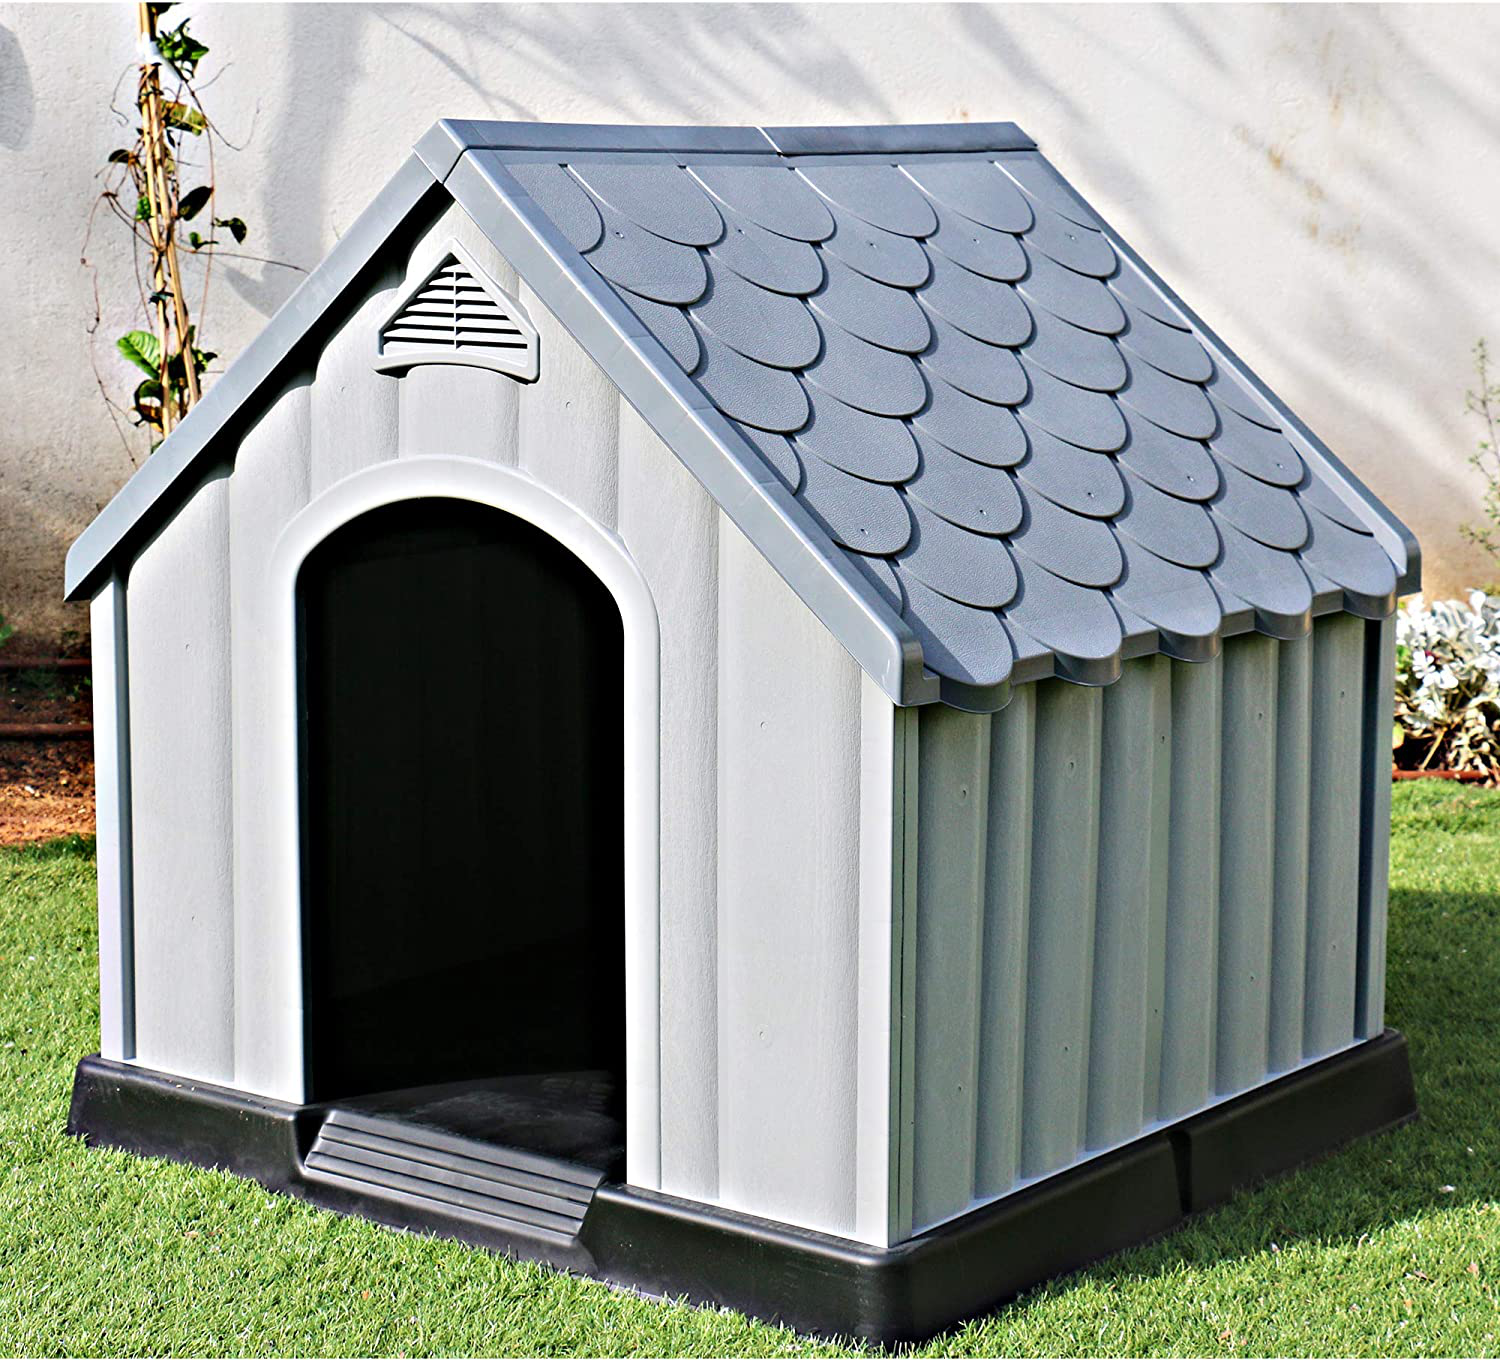 Ram Quality Products Innovative Outdoor Pet House Large Waterproof Dog Kennel Shelter for Small, Medium, and Large Dogs, 36 X 34.5 X 36 Inches, Gray